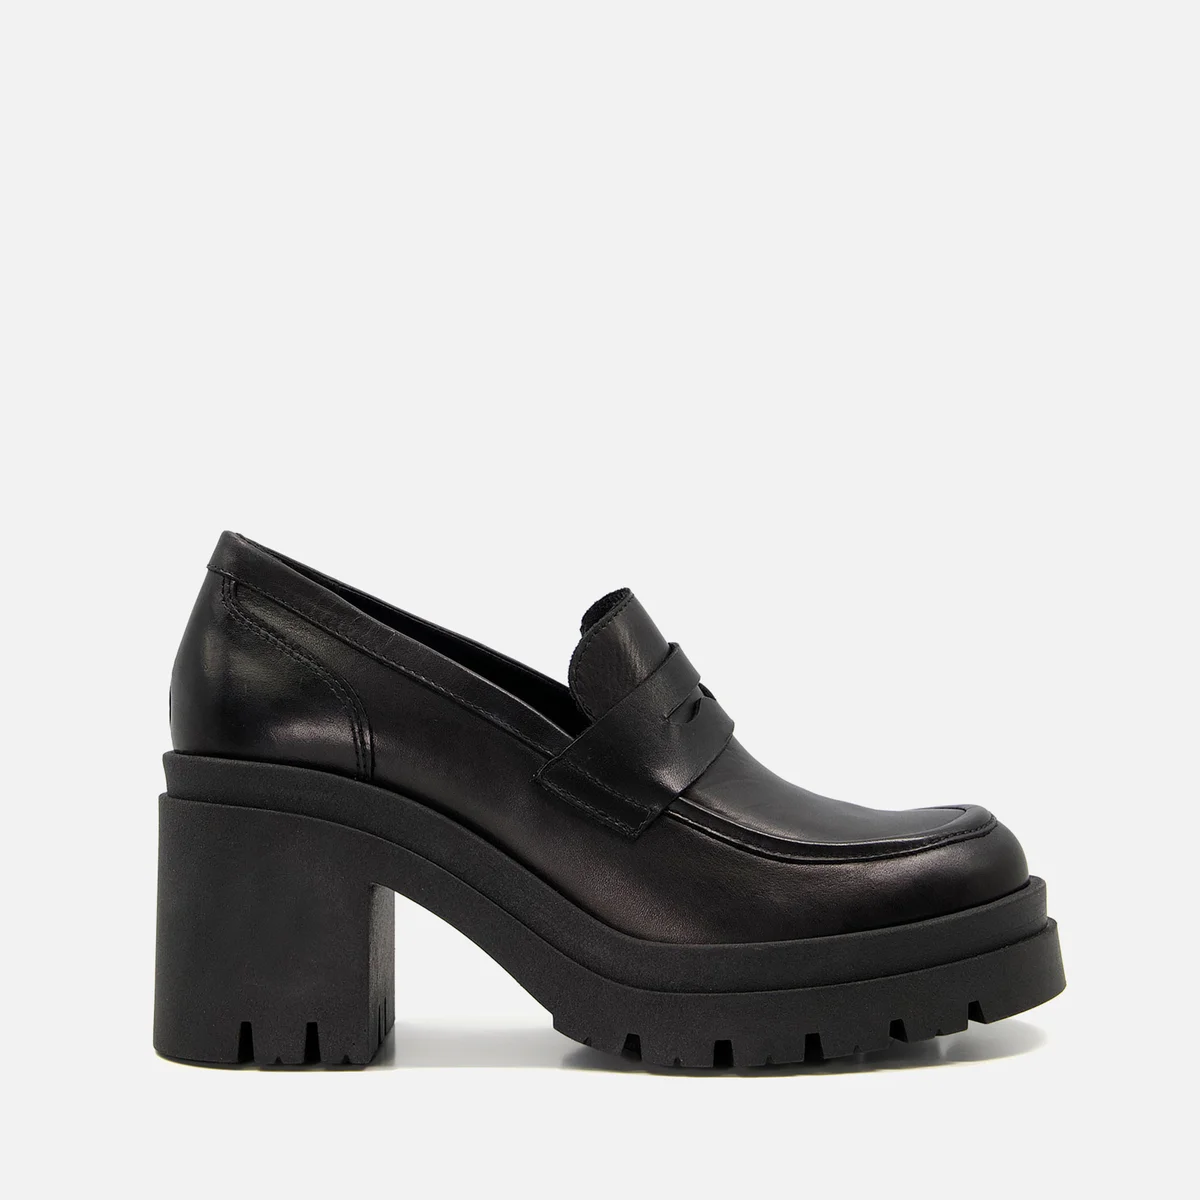 Dune Grounded Leather Heeled Loafers Image 1